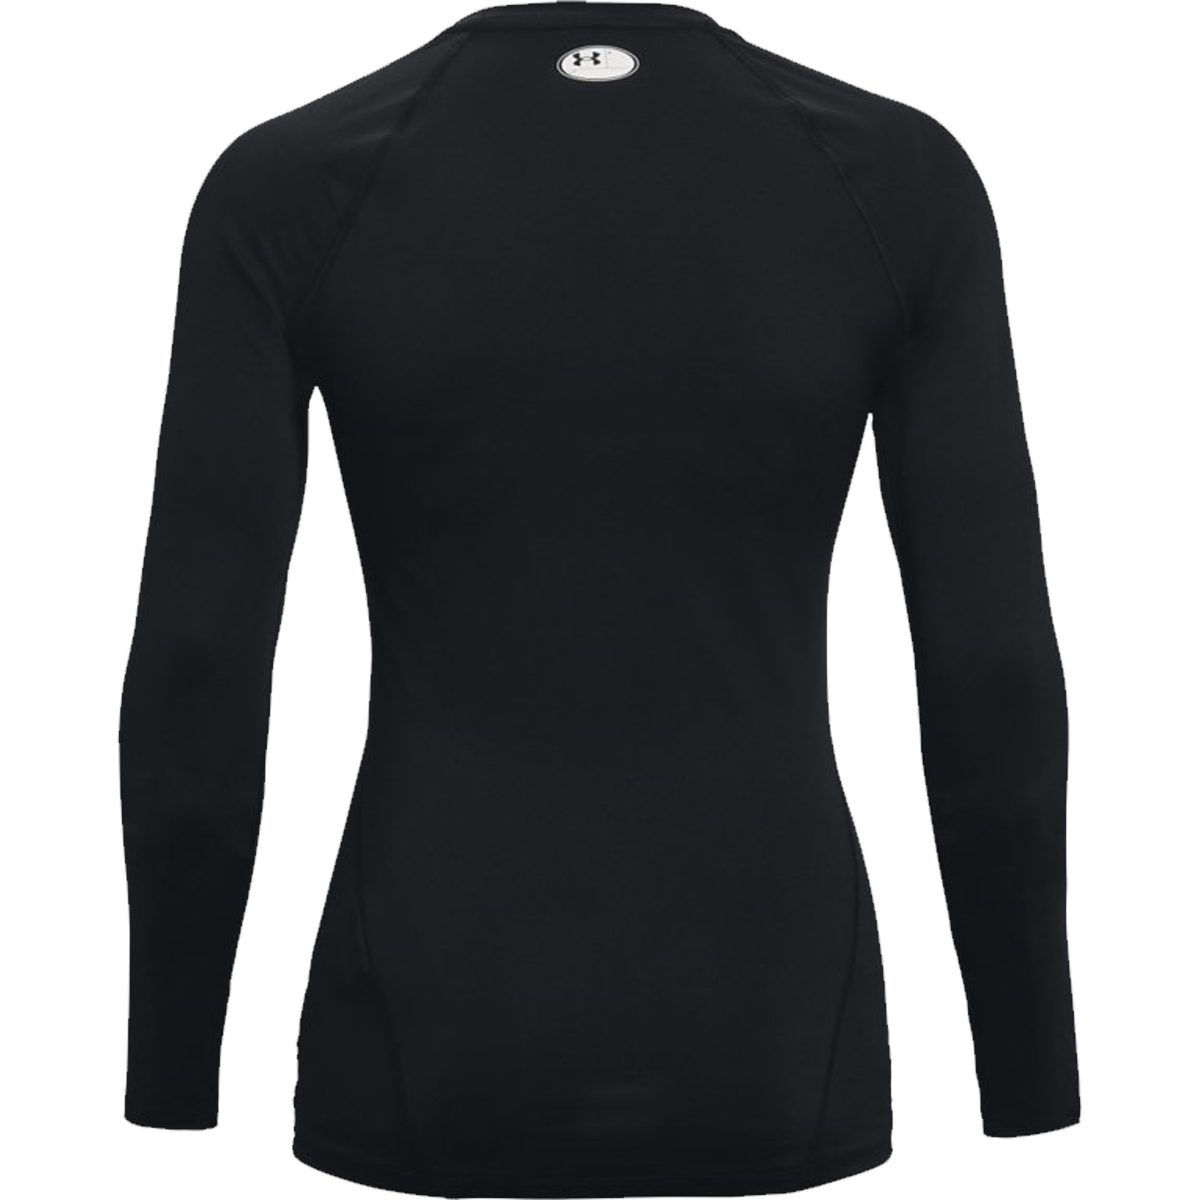 Long Sleeve Compression Shirt - Hydrow Apparel Store